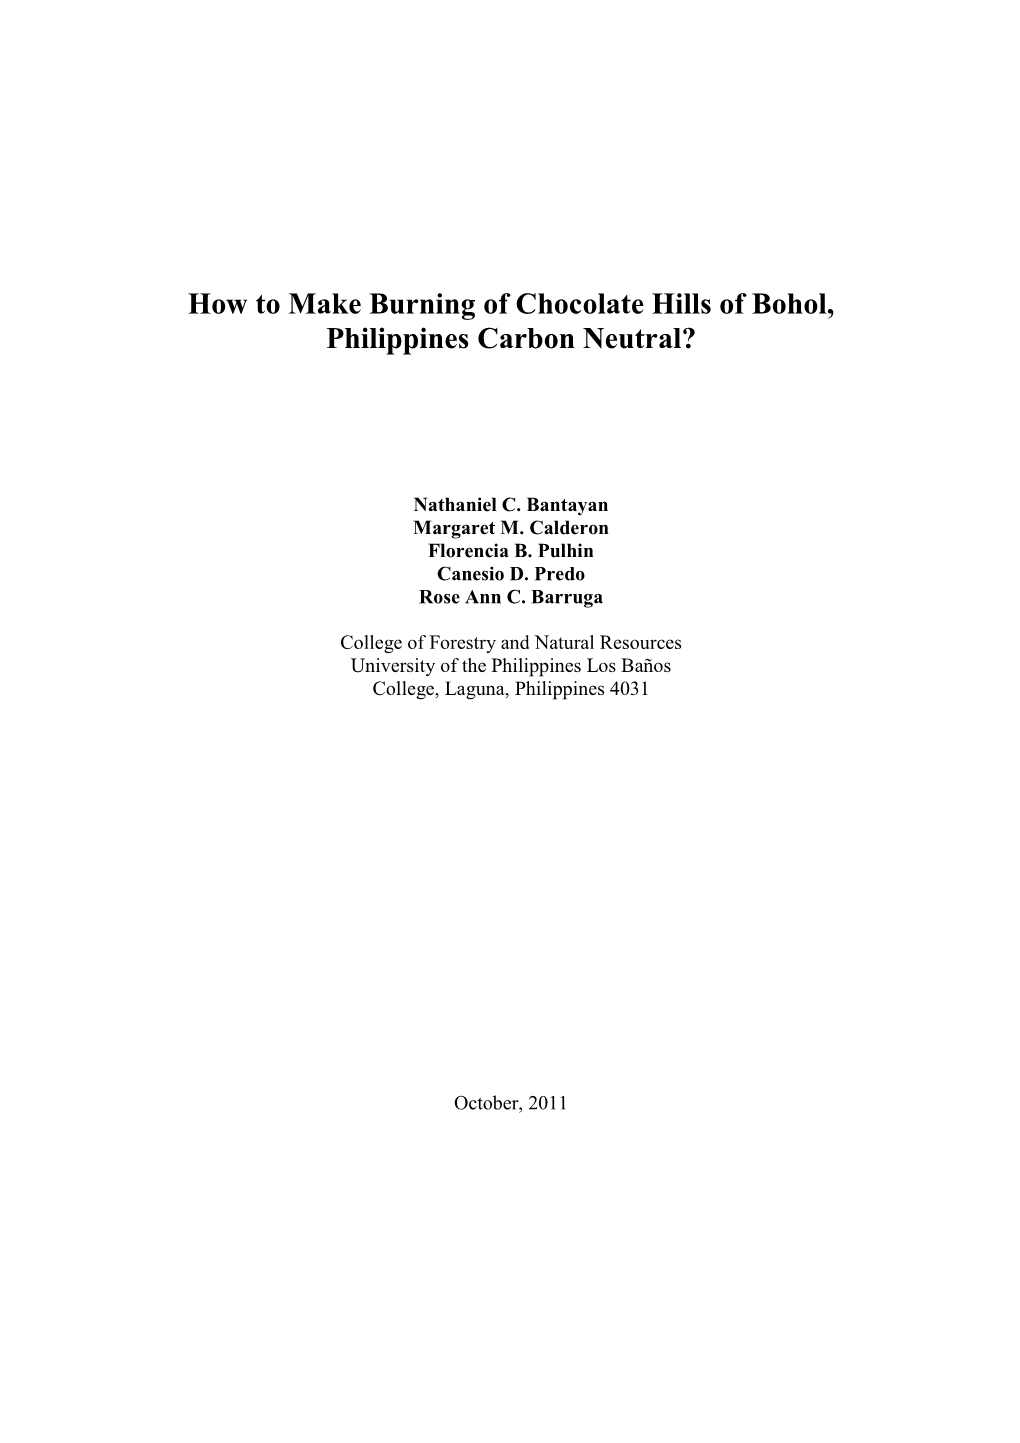 How to Make Burning of Chocolate Hills of Bohol, Philippines Carbon Neutral?